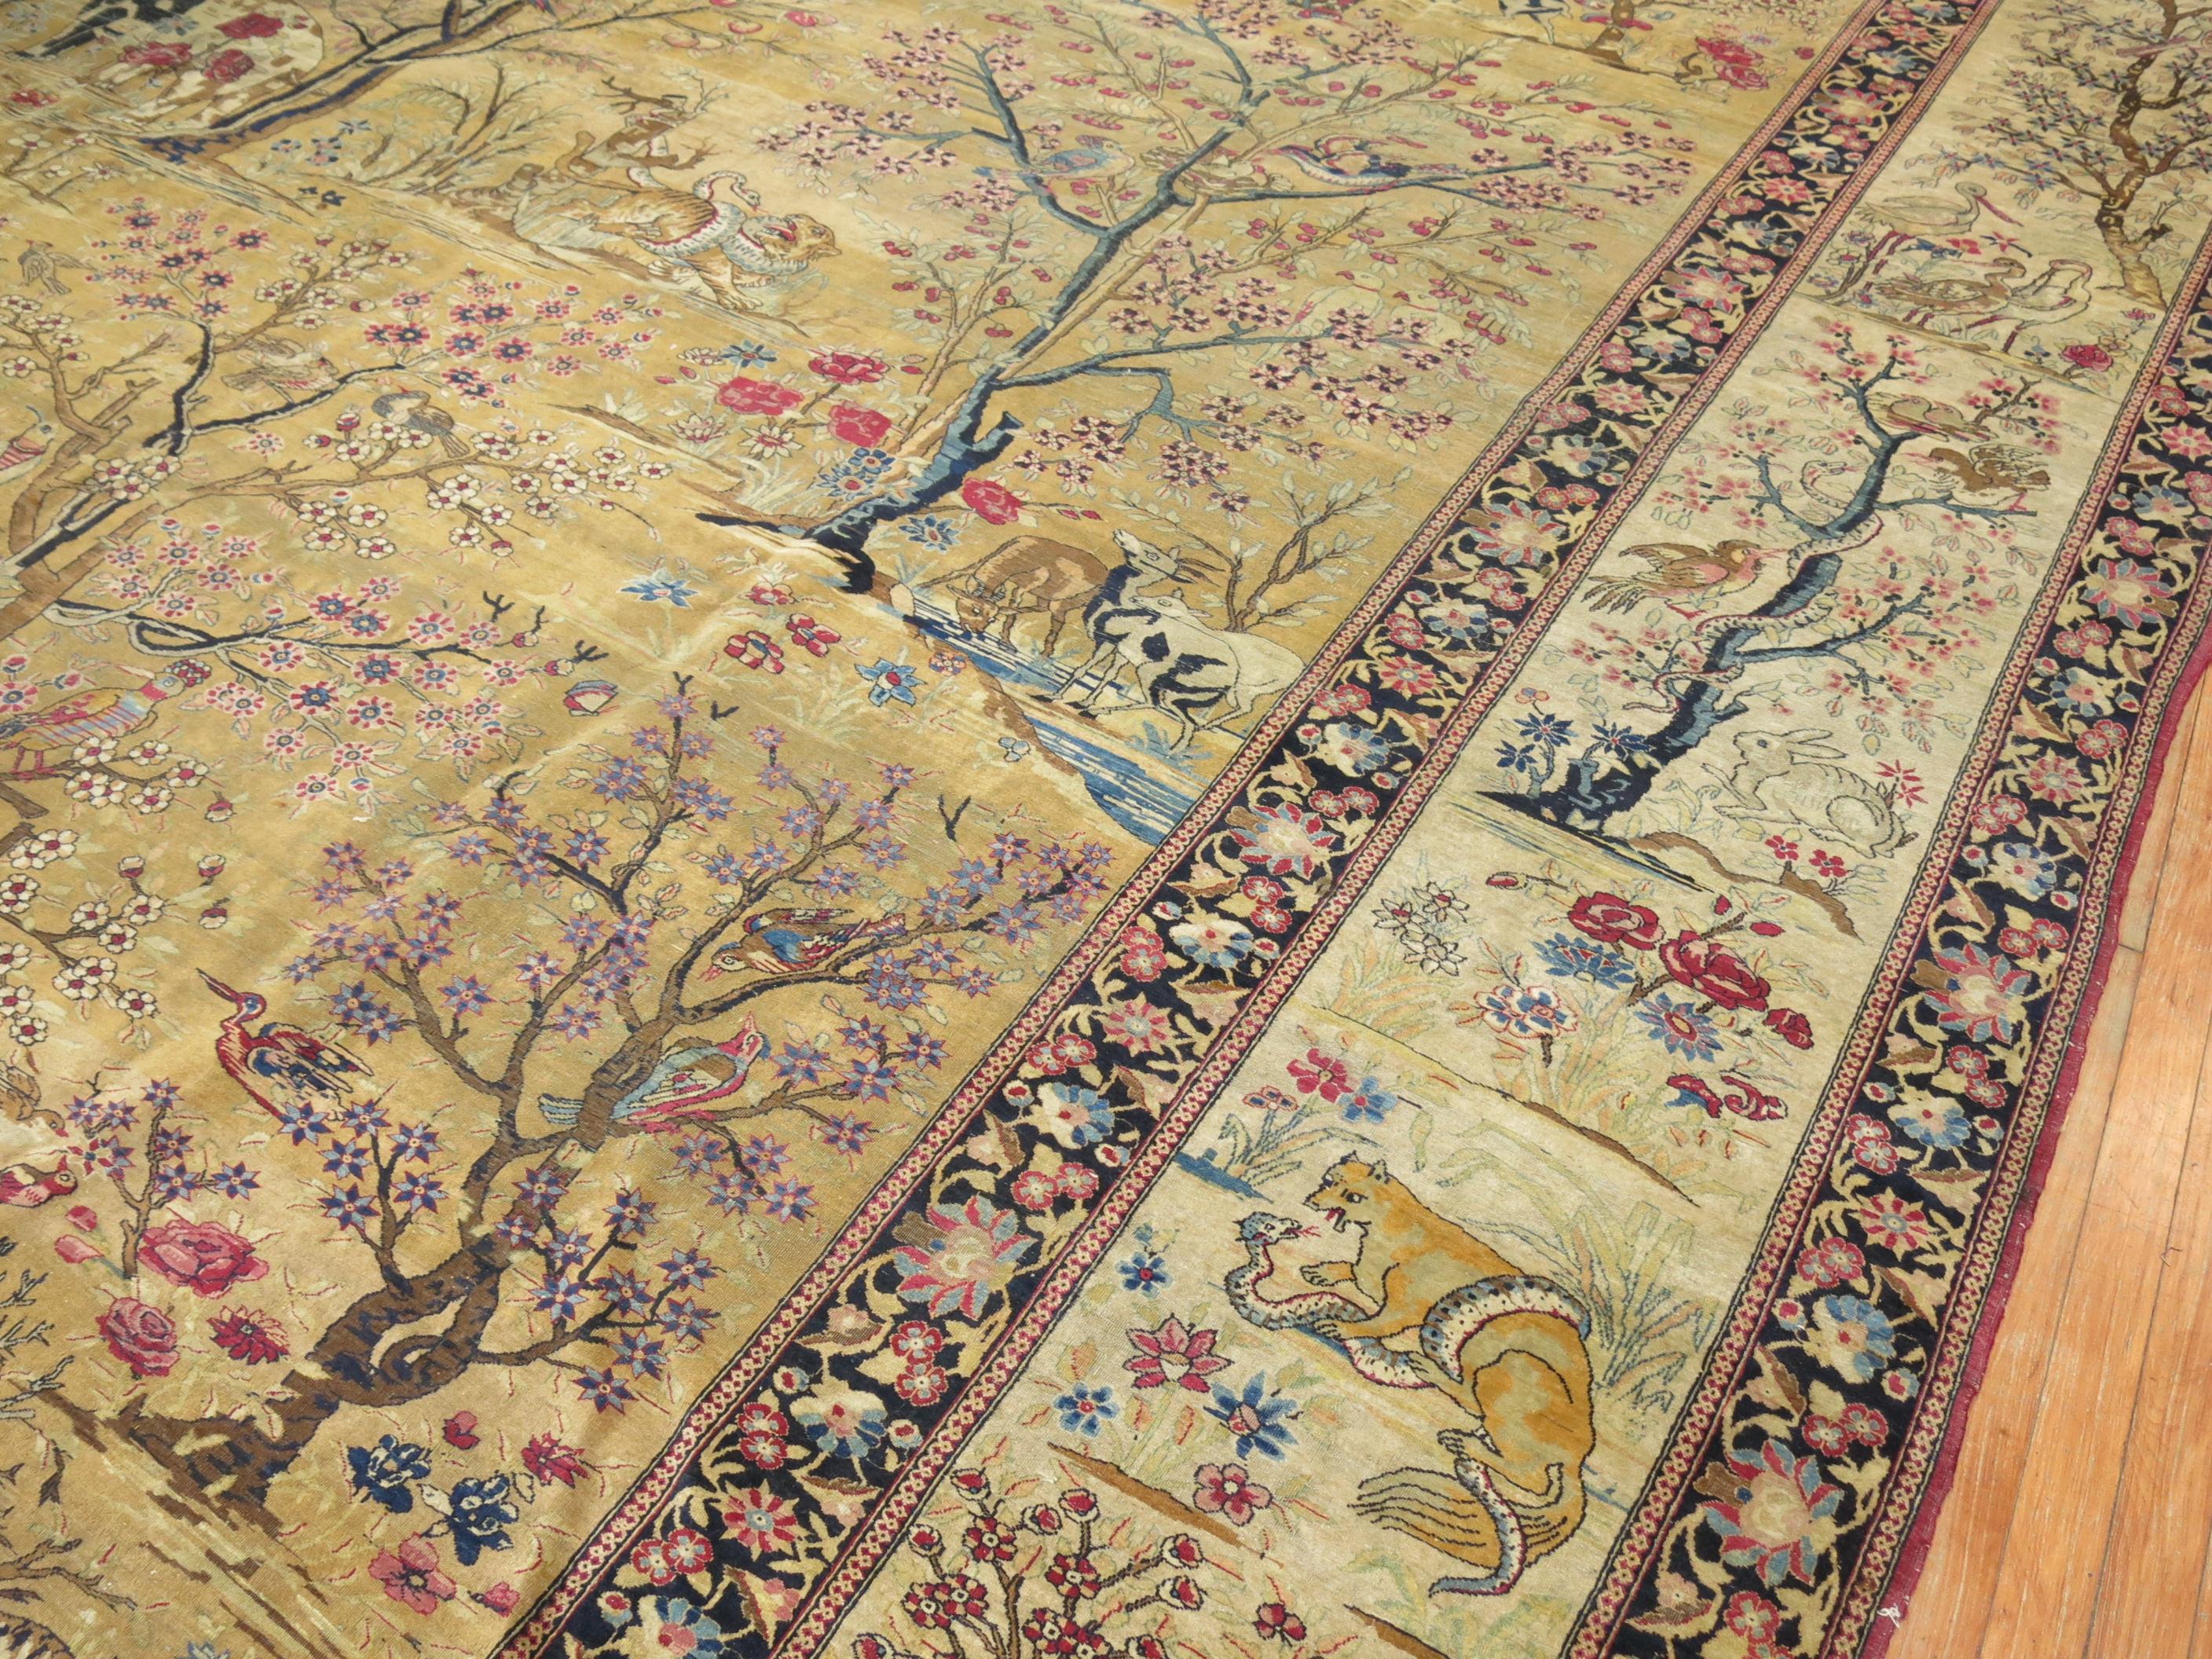 Persian Pictorial Animal Landscape Rug 2